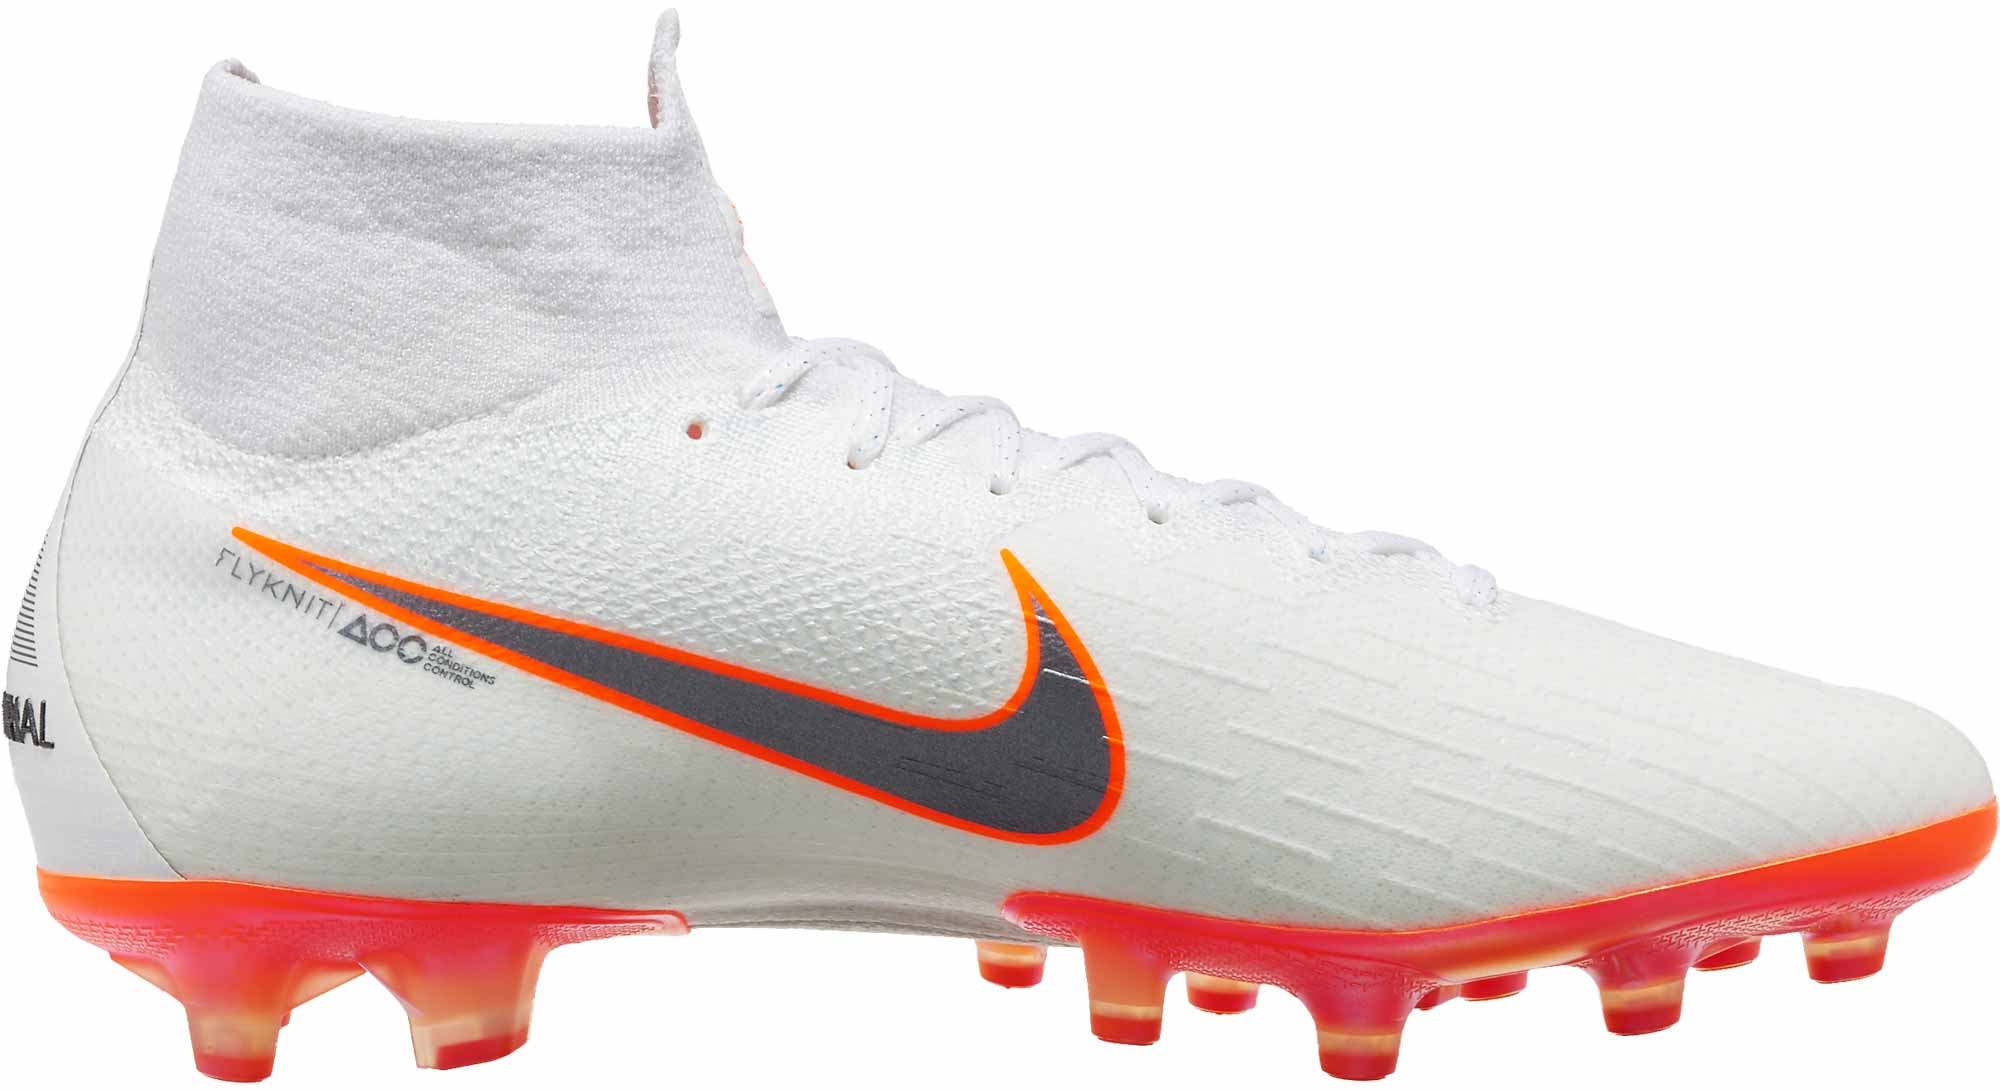 Nike Mercurial Superfly 7 Pro FG Future LabFarve Laser.